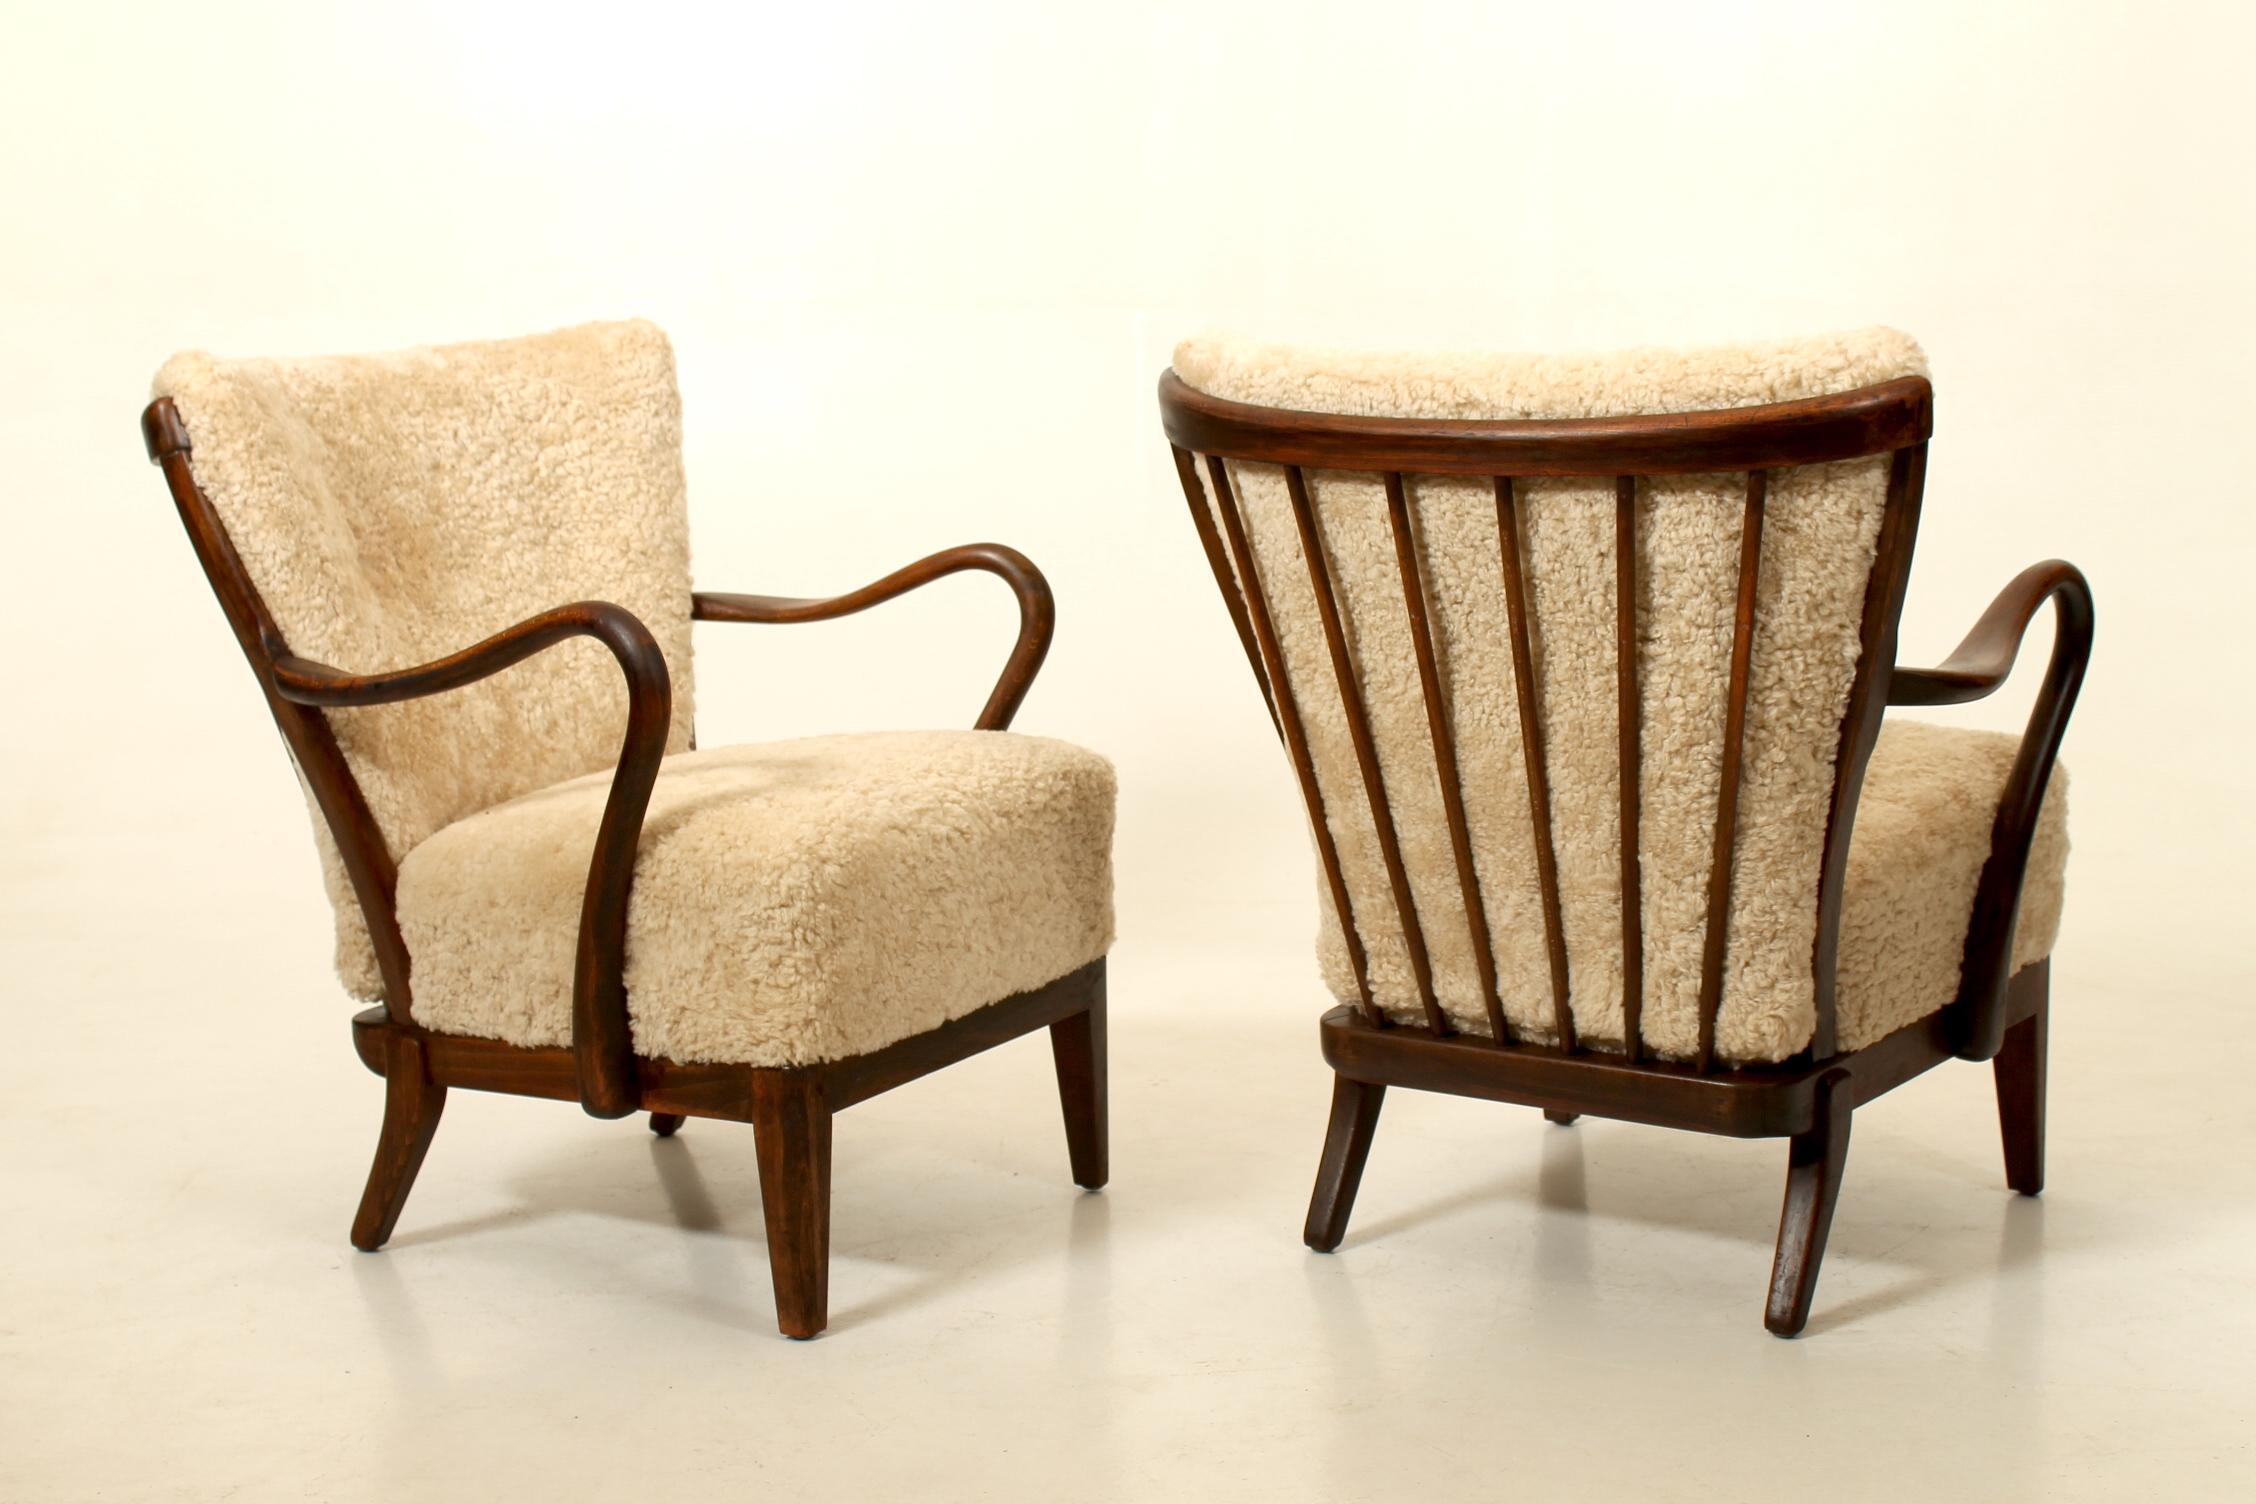 Stained Pair of 1940s lounge chairs by Alfred Christensen, Denmark.